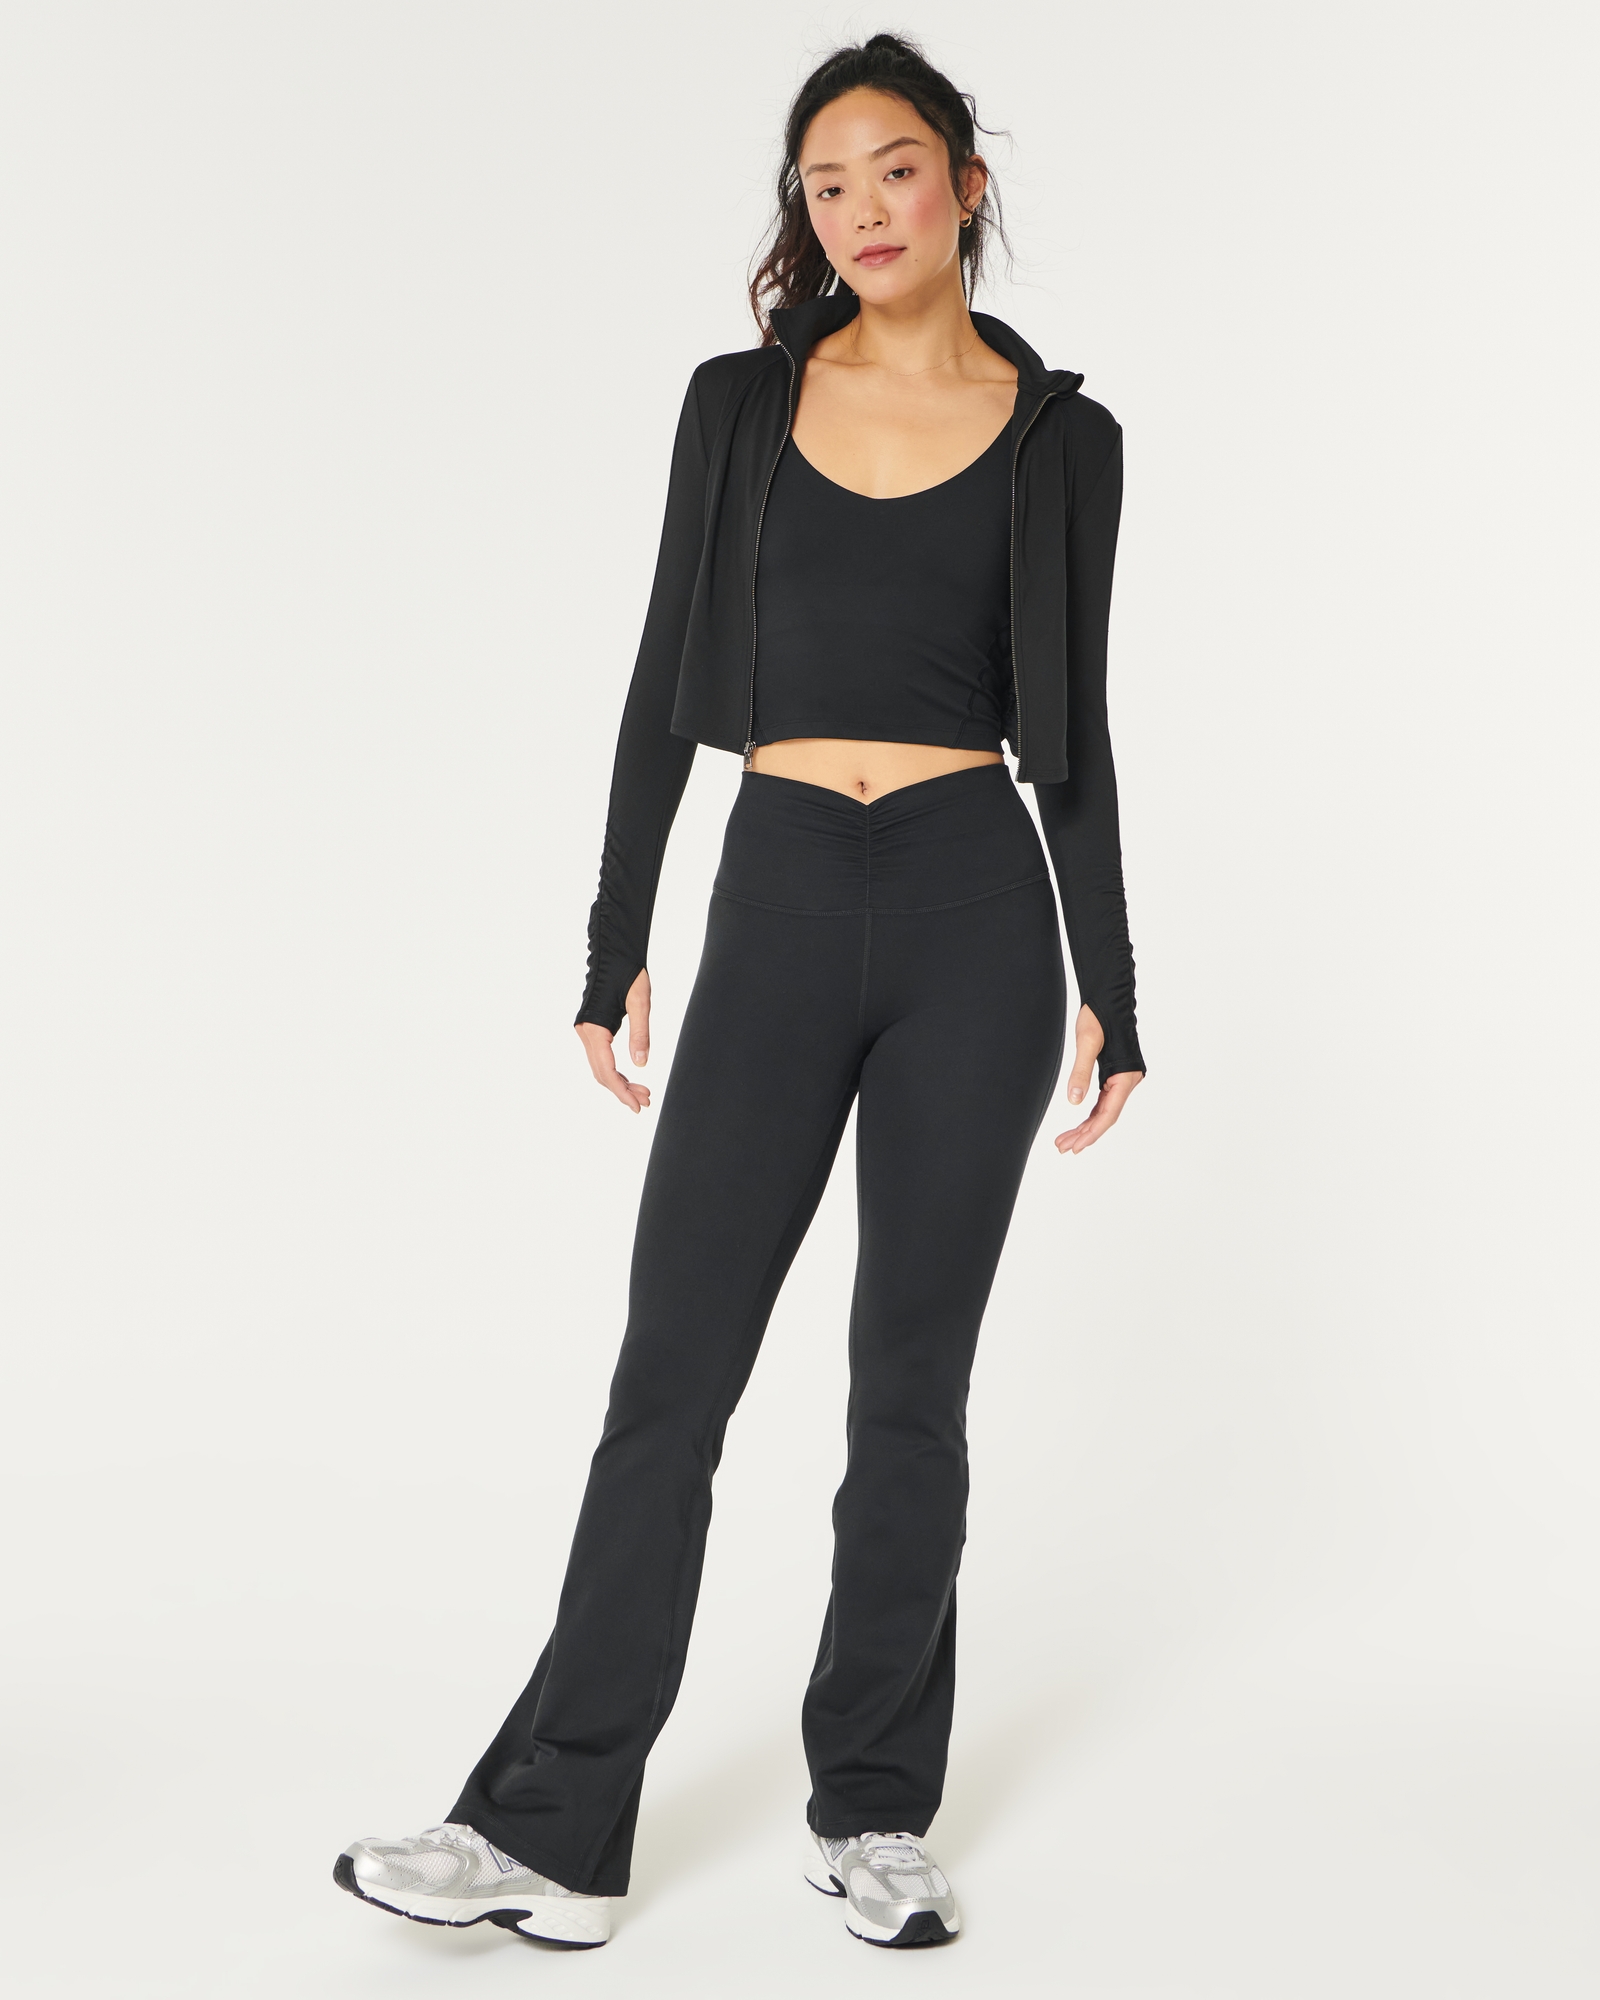 Women's Gilly Hicks Active Recharge Ruched Waist High-Rise Flare Leggings, Women's New Arrivals